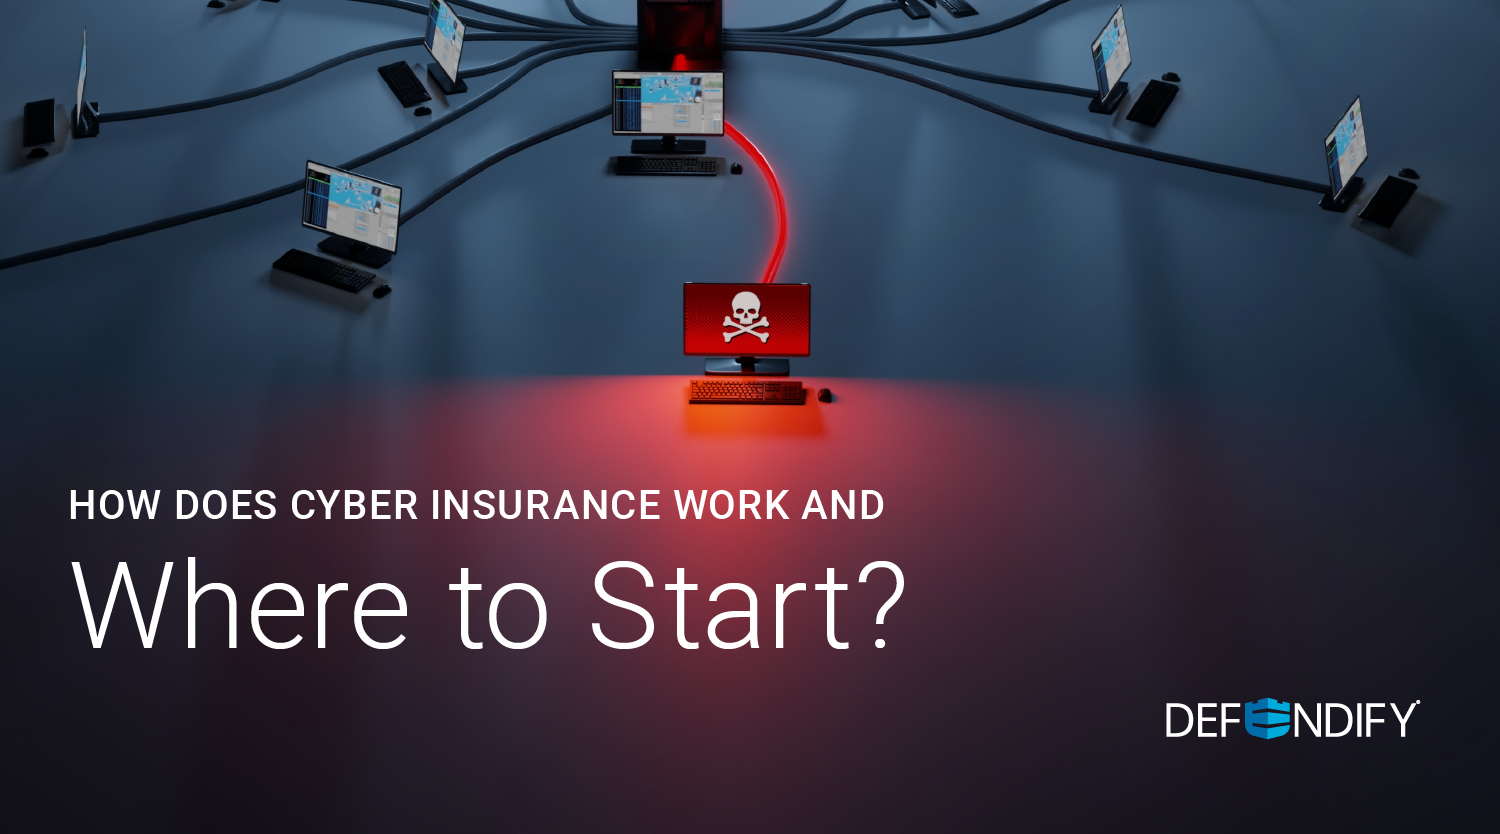 How Does Cyber Insurance Work and Where to Start?